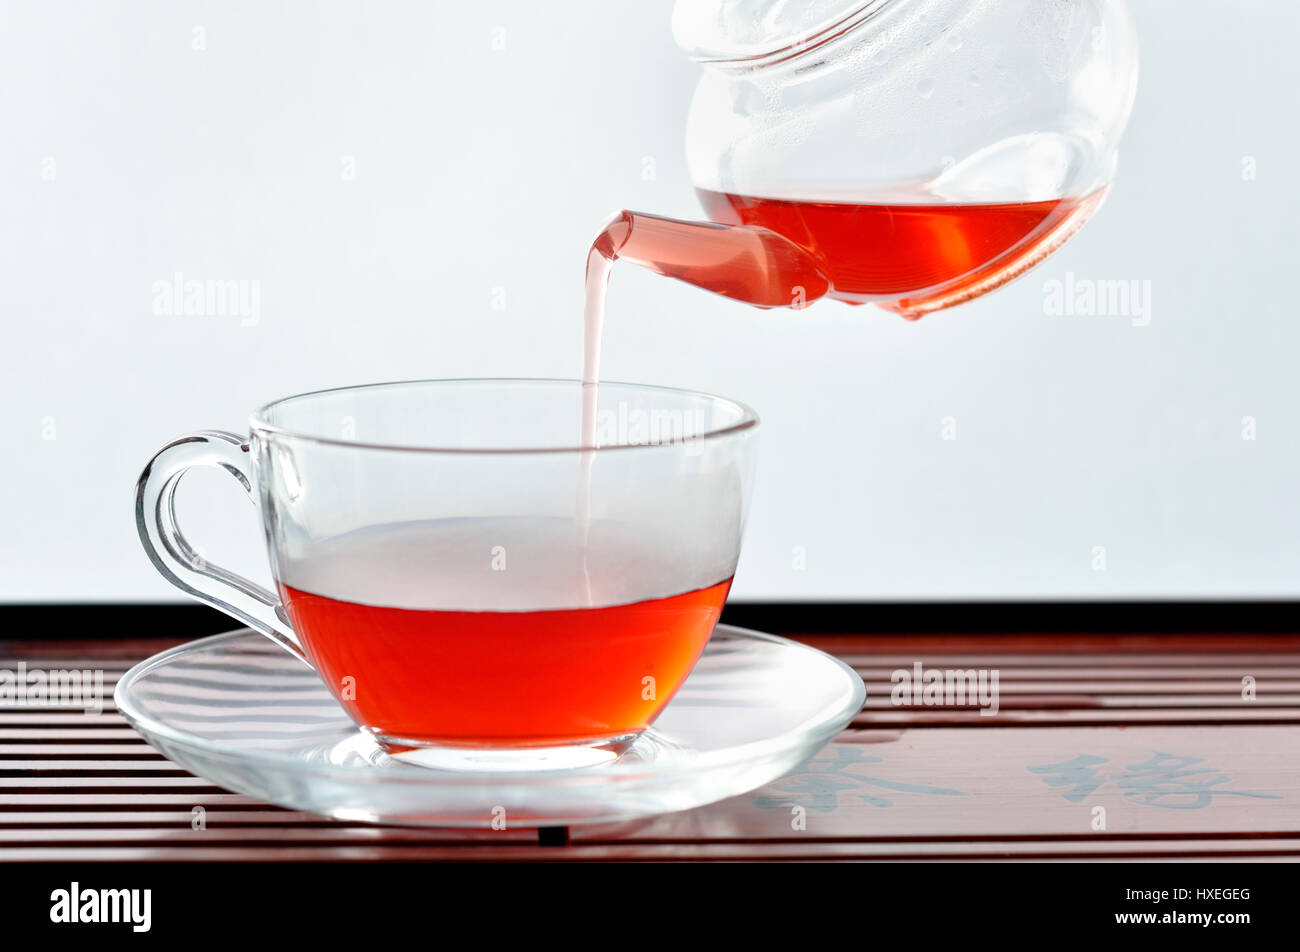 Pouring tea into a clear glass cafe style cup from teapot Stock Photo